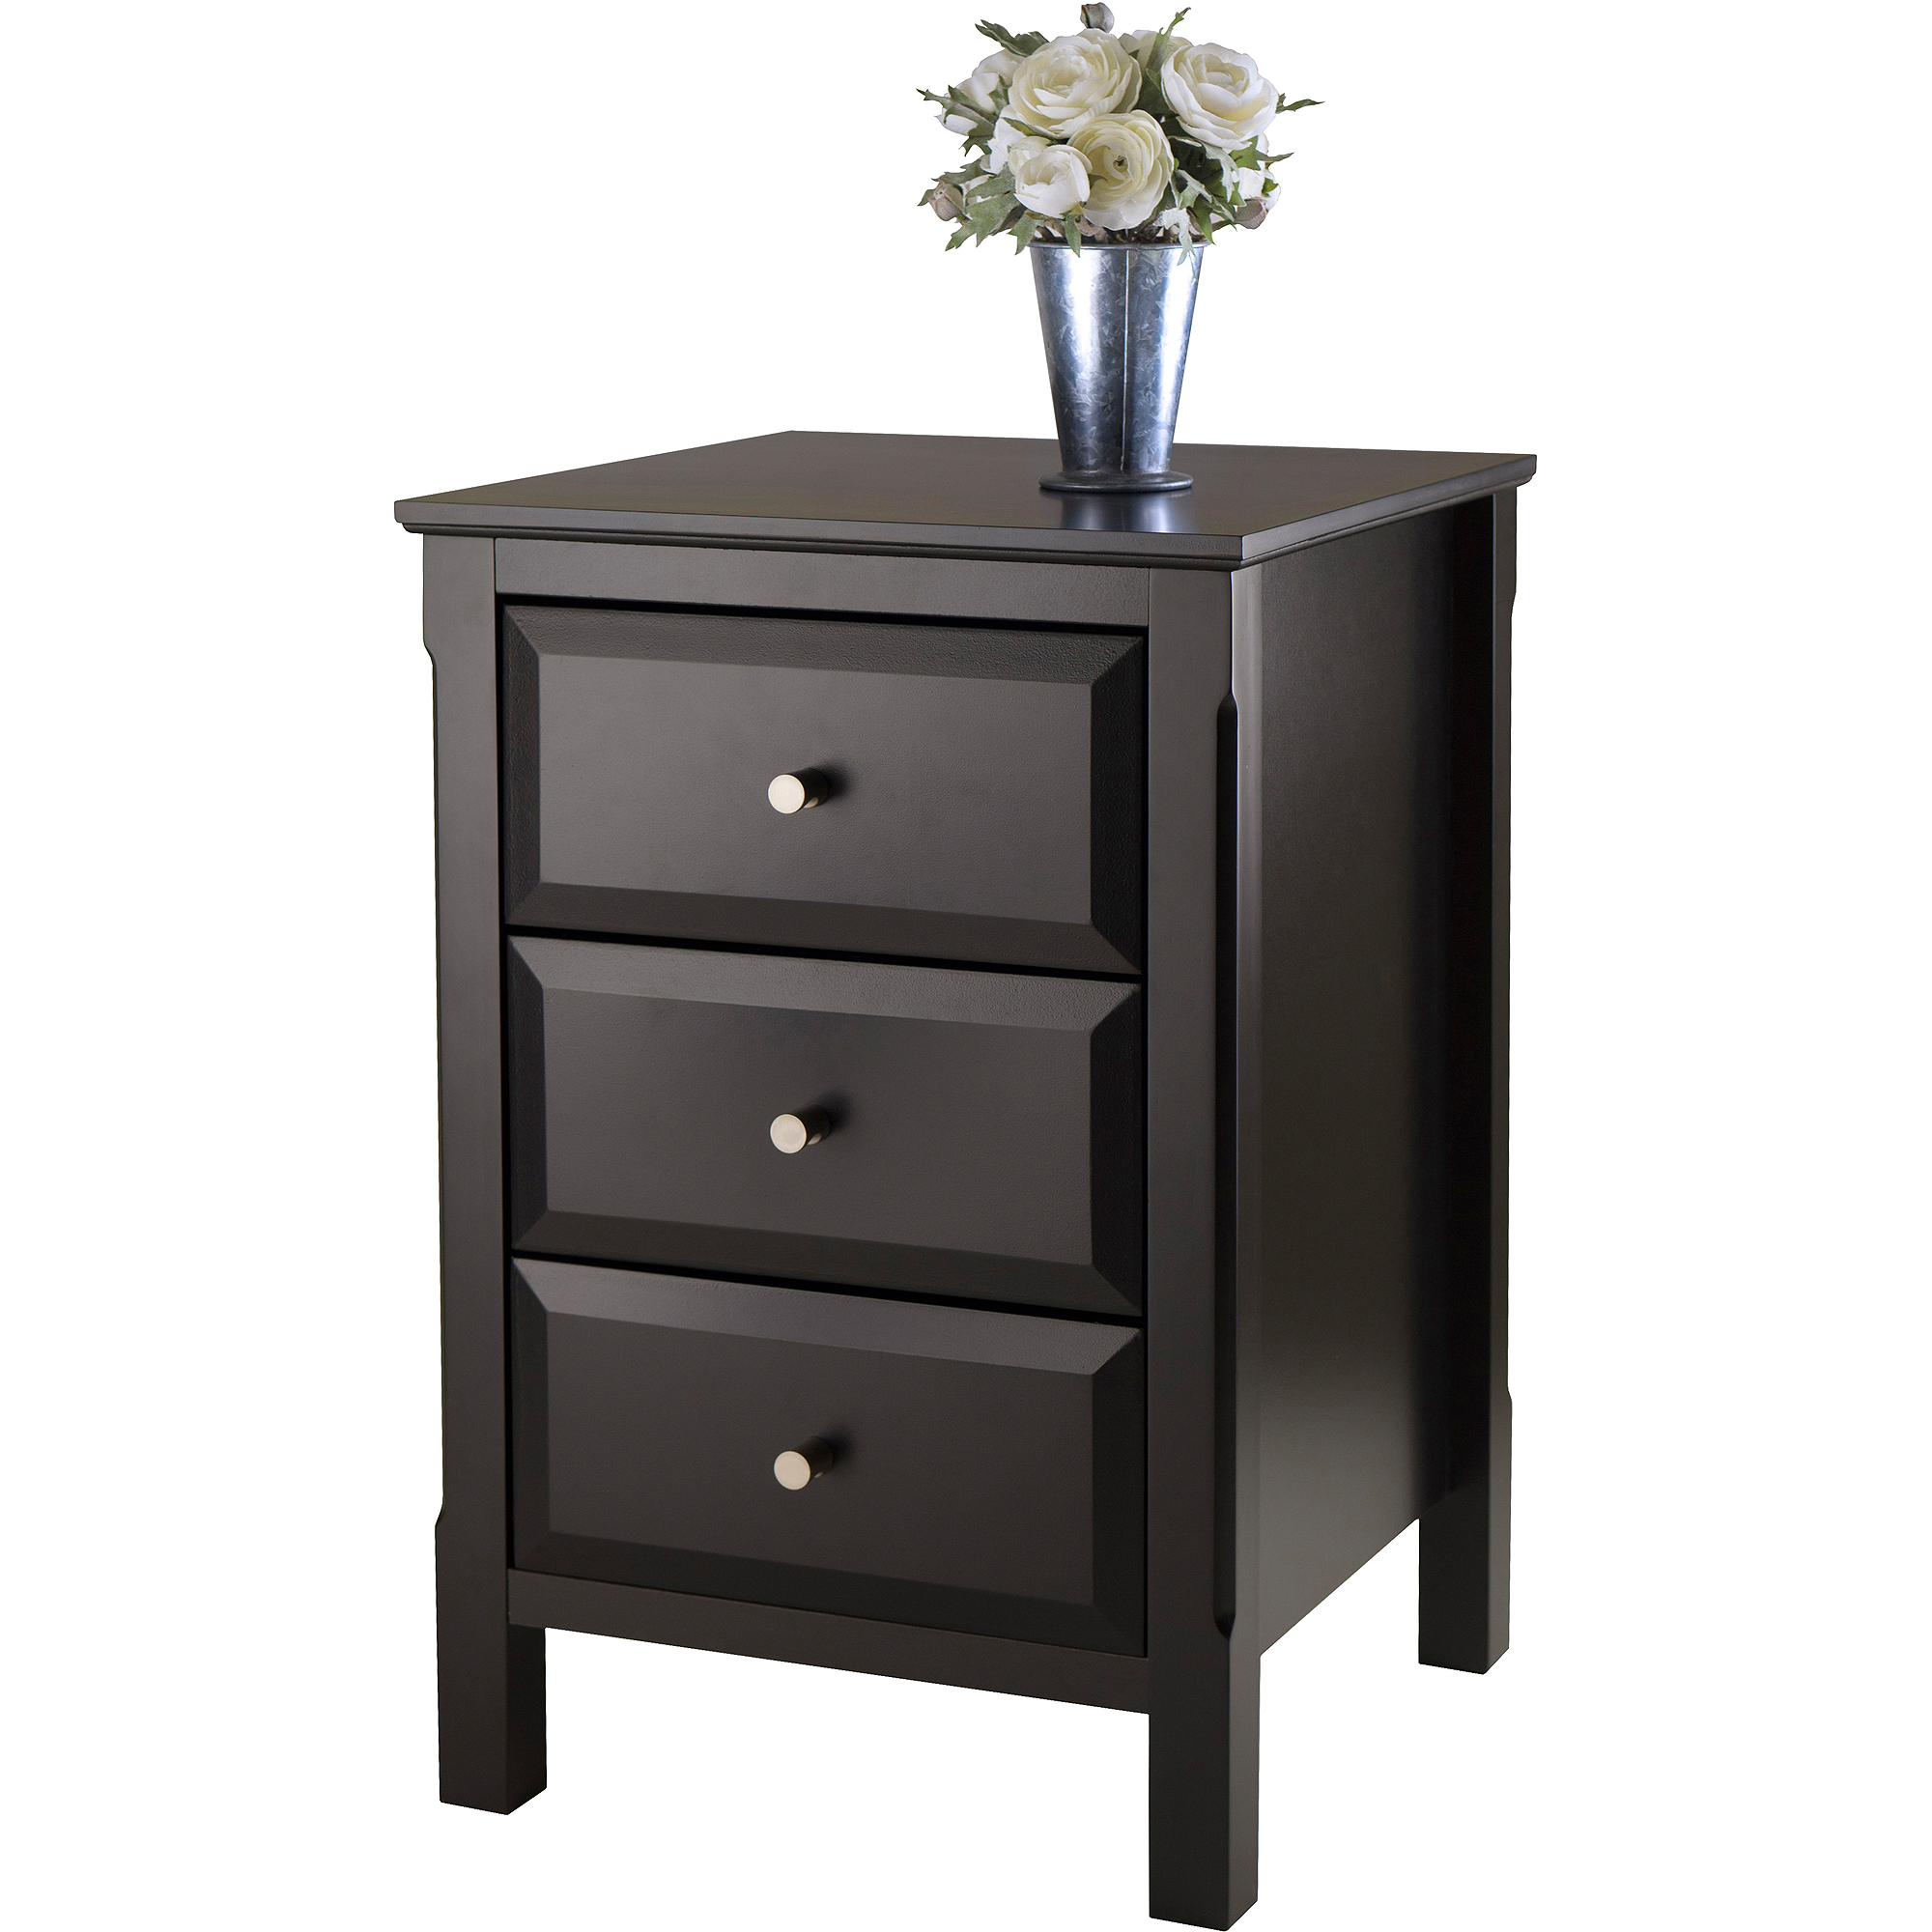 winsome timmy nightstand accent table black with basket drawers gold lamp shades wooden threshold plates living room console storage tall narrow hallway uttermost sinley lacquer